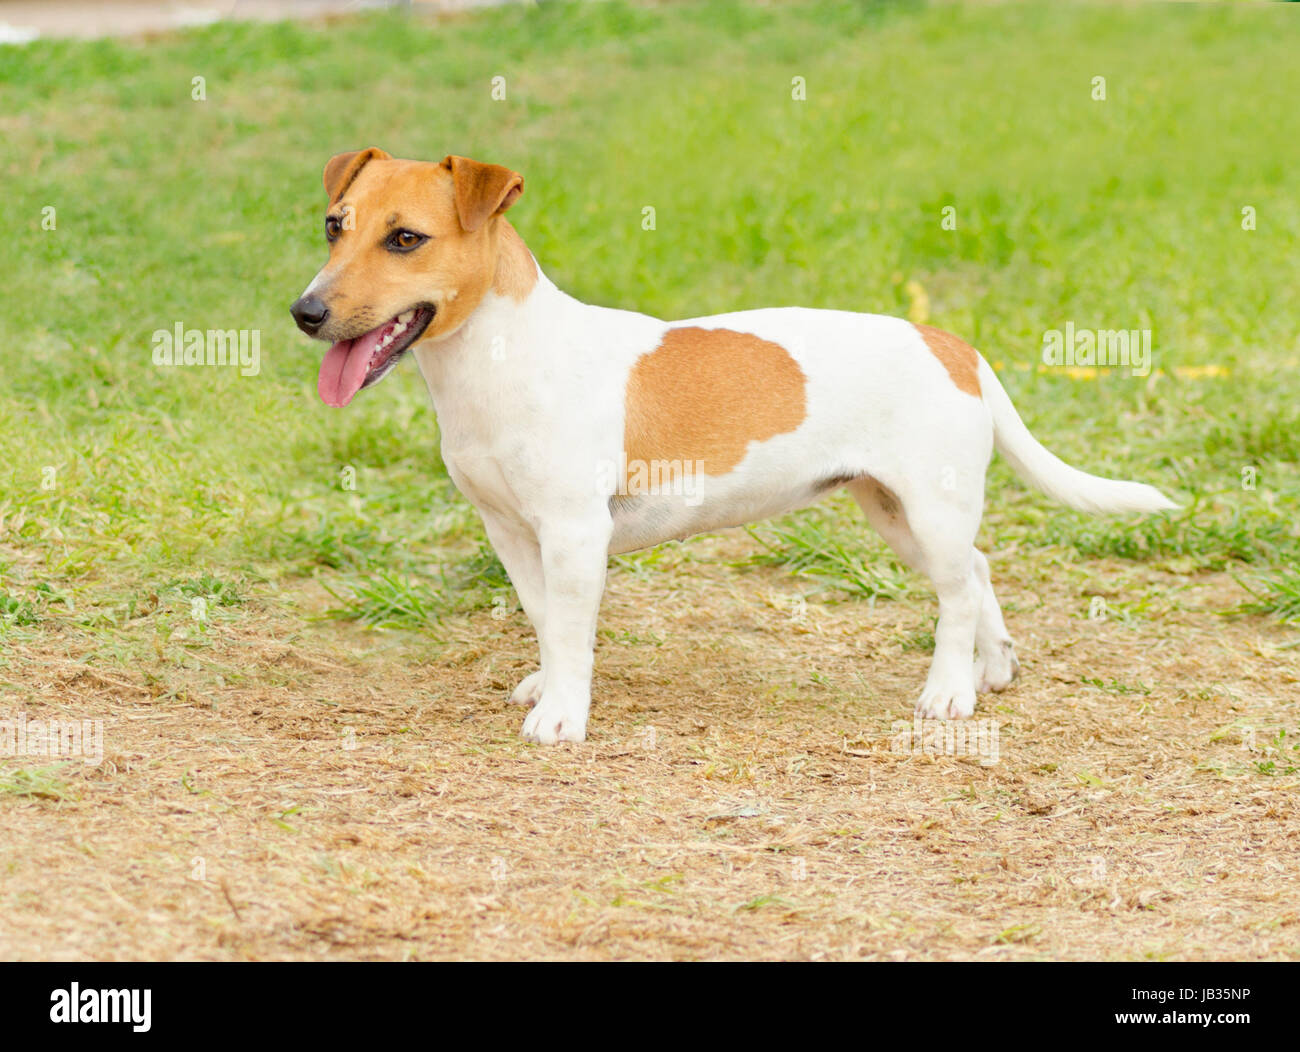 A small white and tan smooth coated Jack Russell Terrier dog walking on the grass, looking very happy. It is known for being confident, highly intelligent and faithful, and views life as a great adventure. Stock Photo